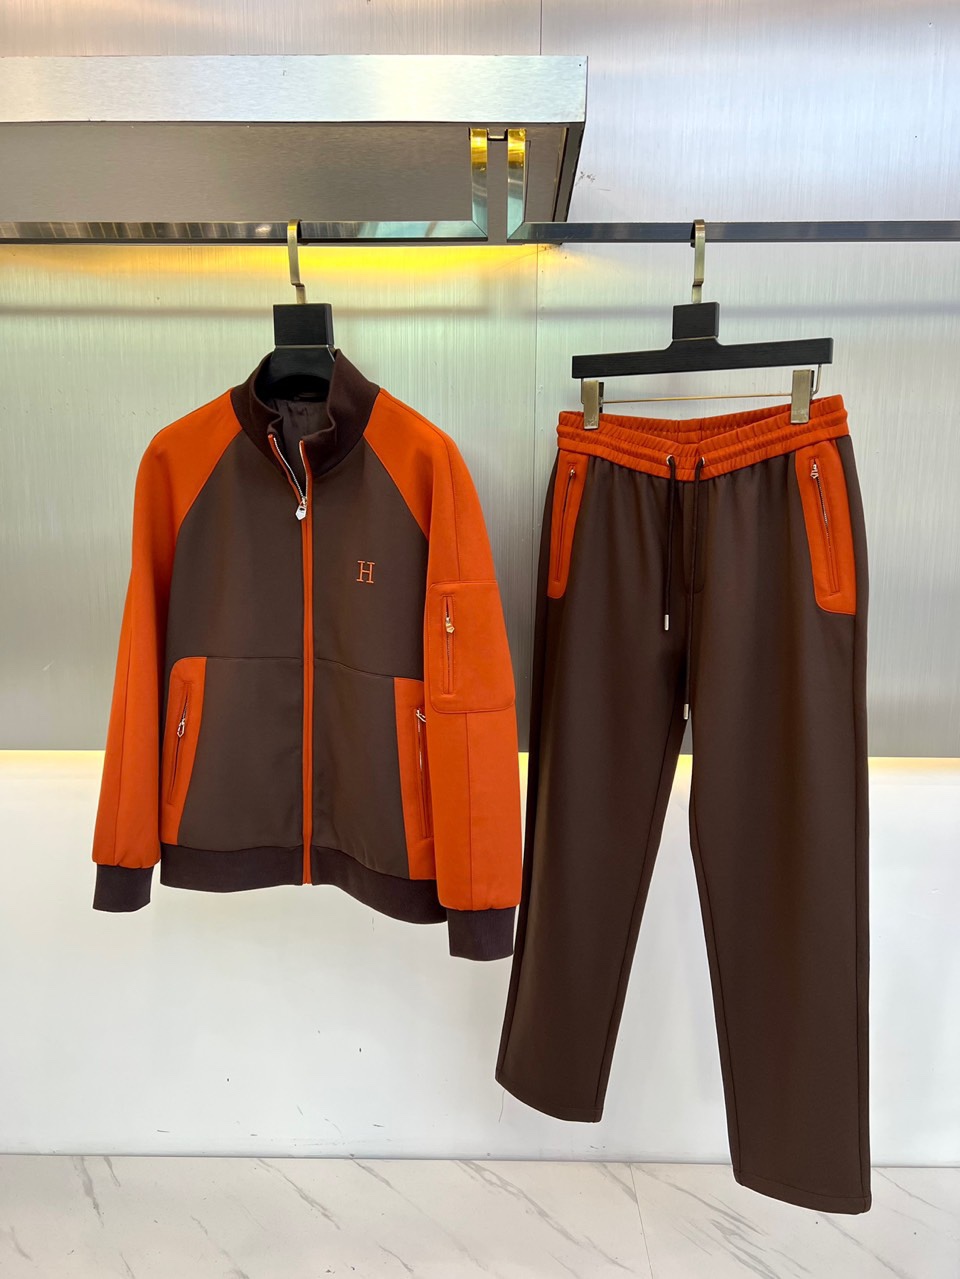 Hermes Clothing Coats & Jackets Pants & Trousers Two Piece Outfits & Matching Sets Top Perfect Fake
 Men Cotton Polyester Spandex Fall/Winter Collection Casual